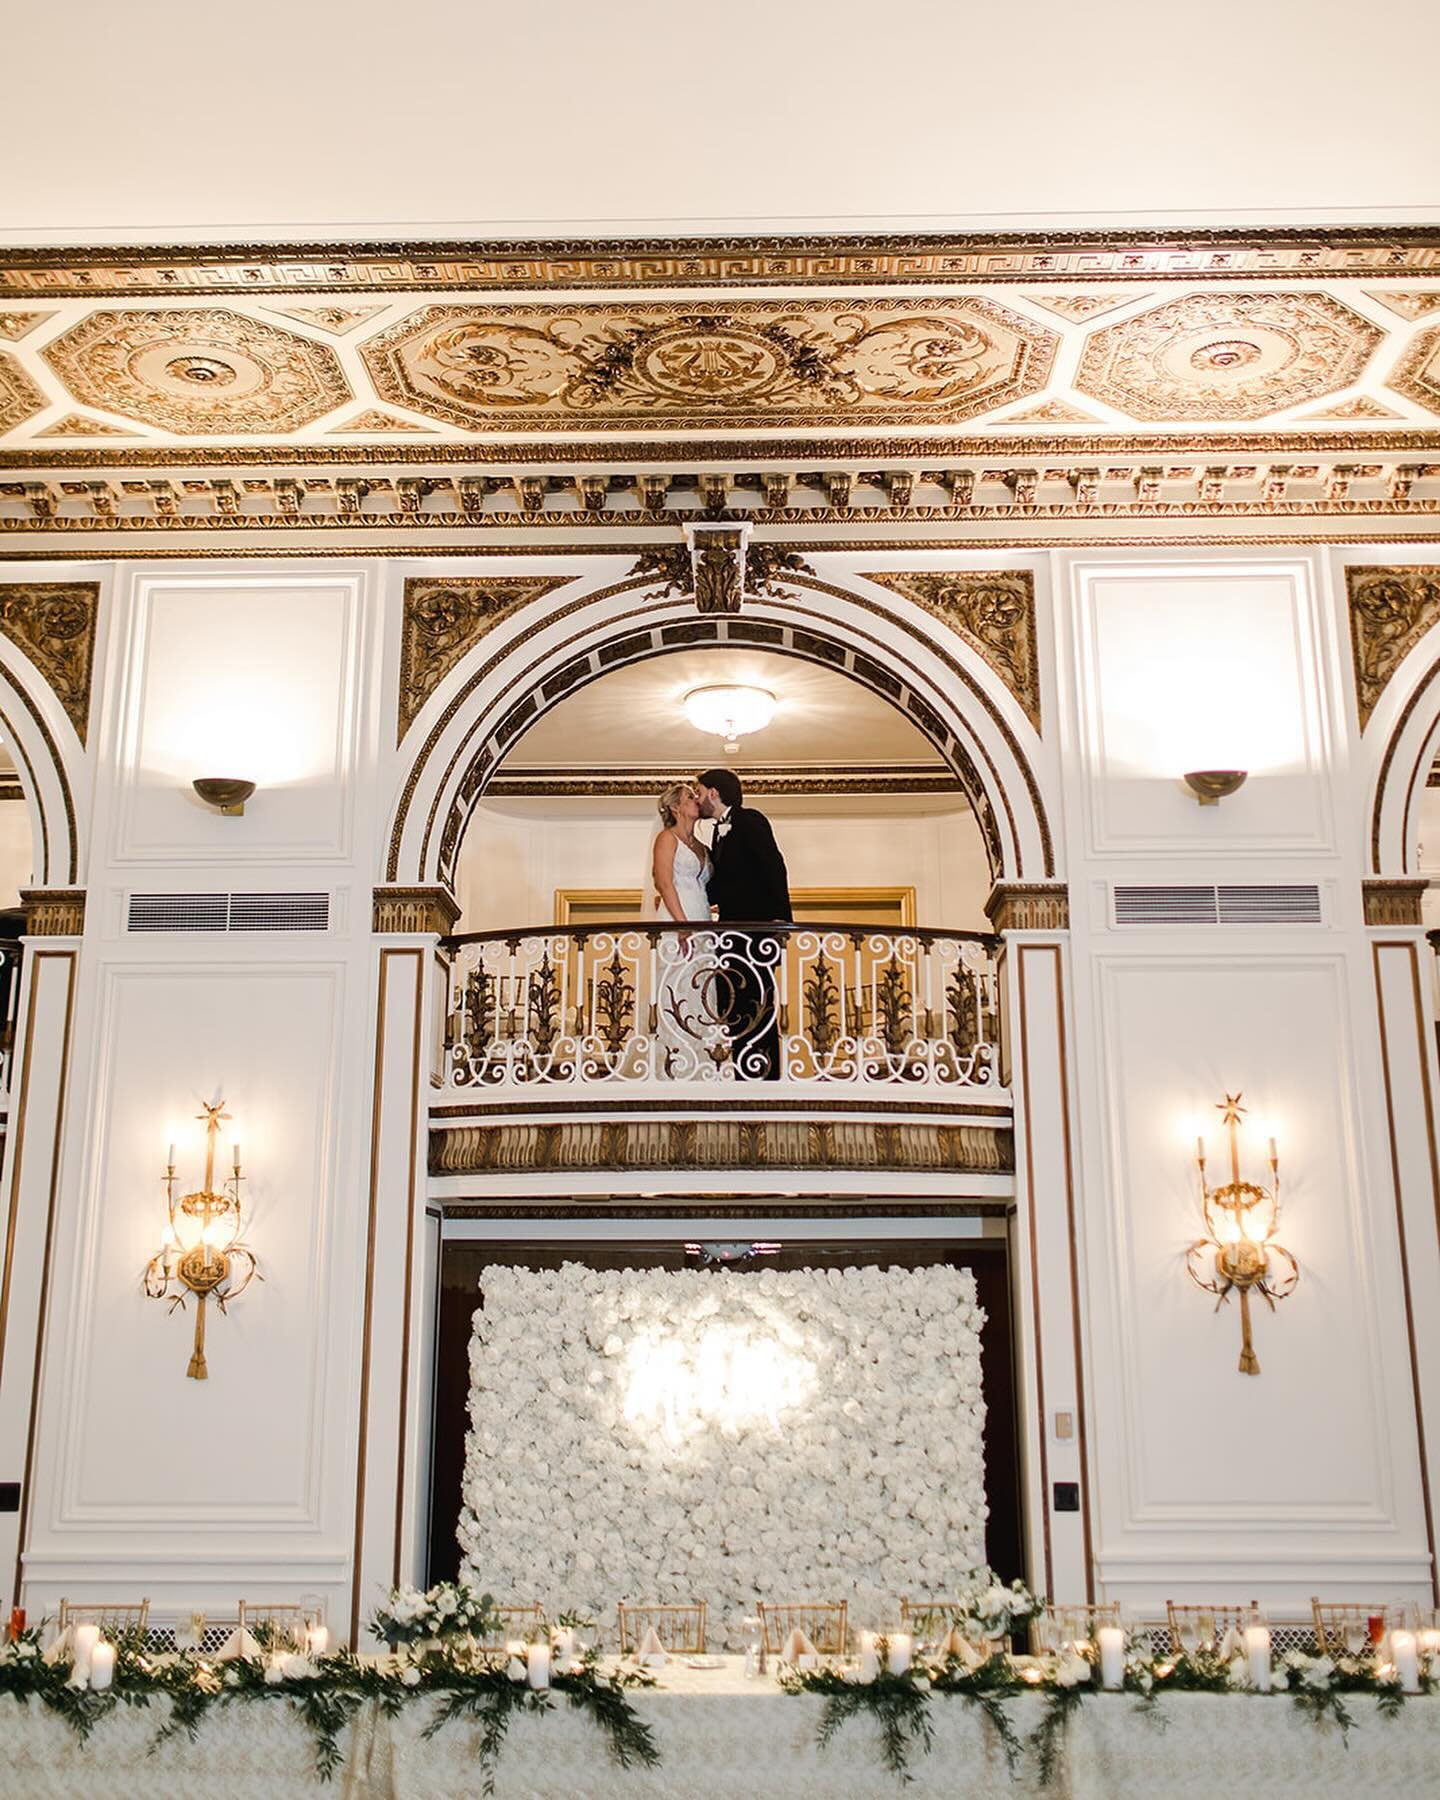 Christian &amp; Megan celebrating their love at our favorite ballroom in the city, Colony Club 🤍

Photo @stephaniekaslly
Planner @k.adamevents 
Florist @thefloweralley 

📲For luxe flower walls please email info@greatlakeseventplanning.com, submit a